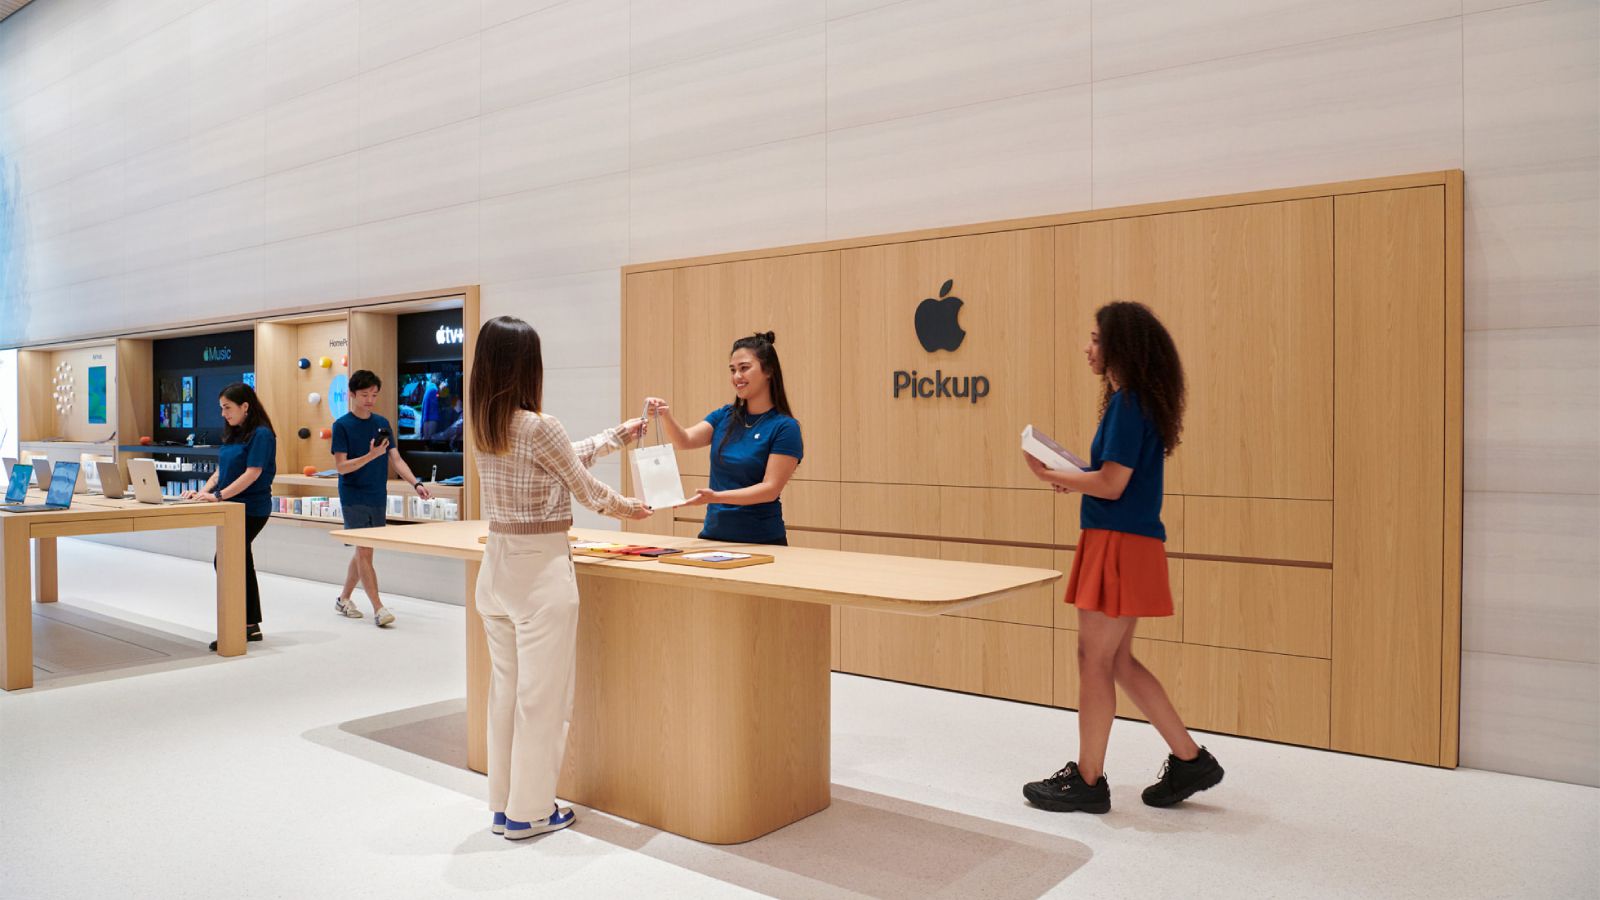 Apple's First Store With Dedicated Pickup Area in UK Opens This Week